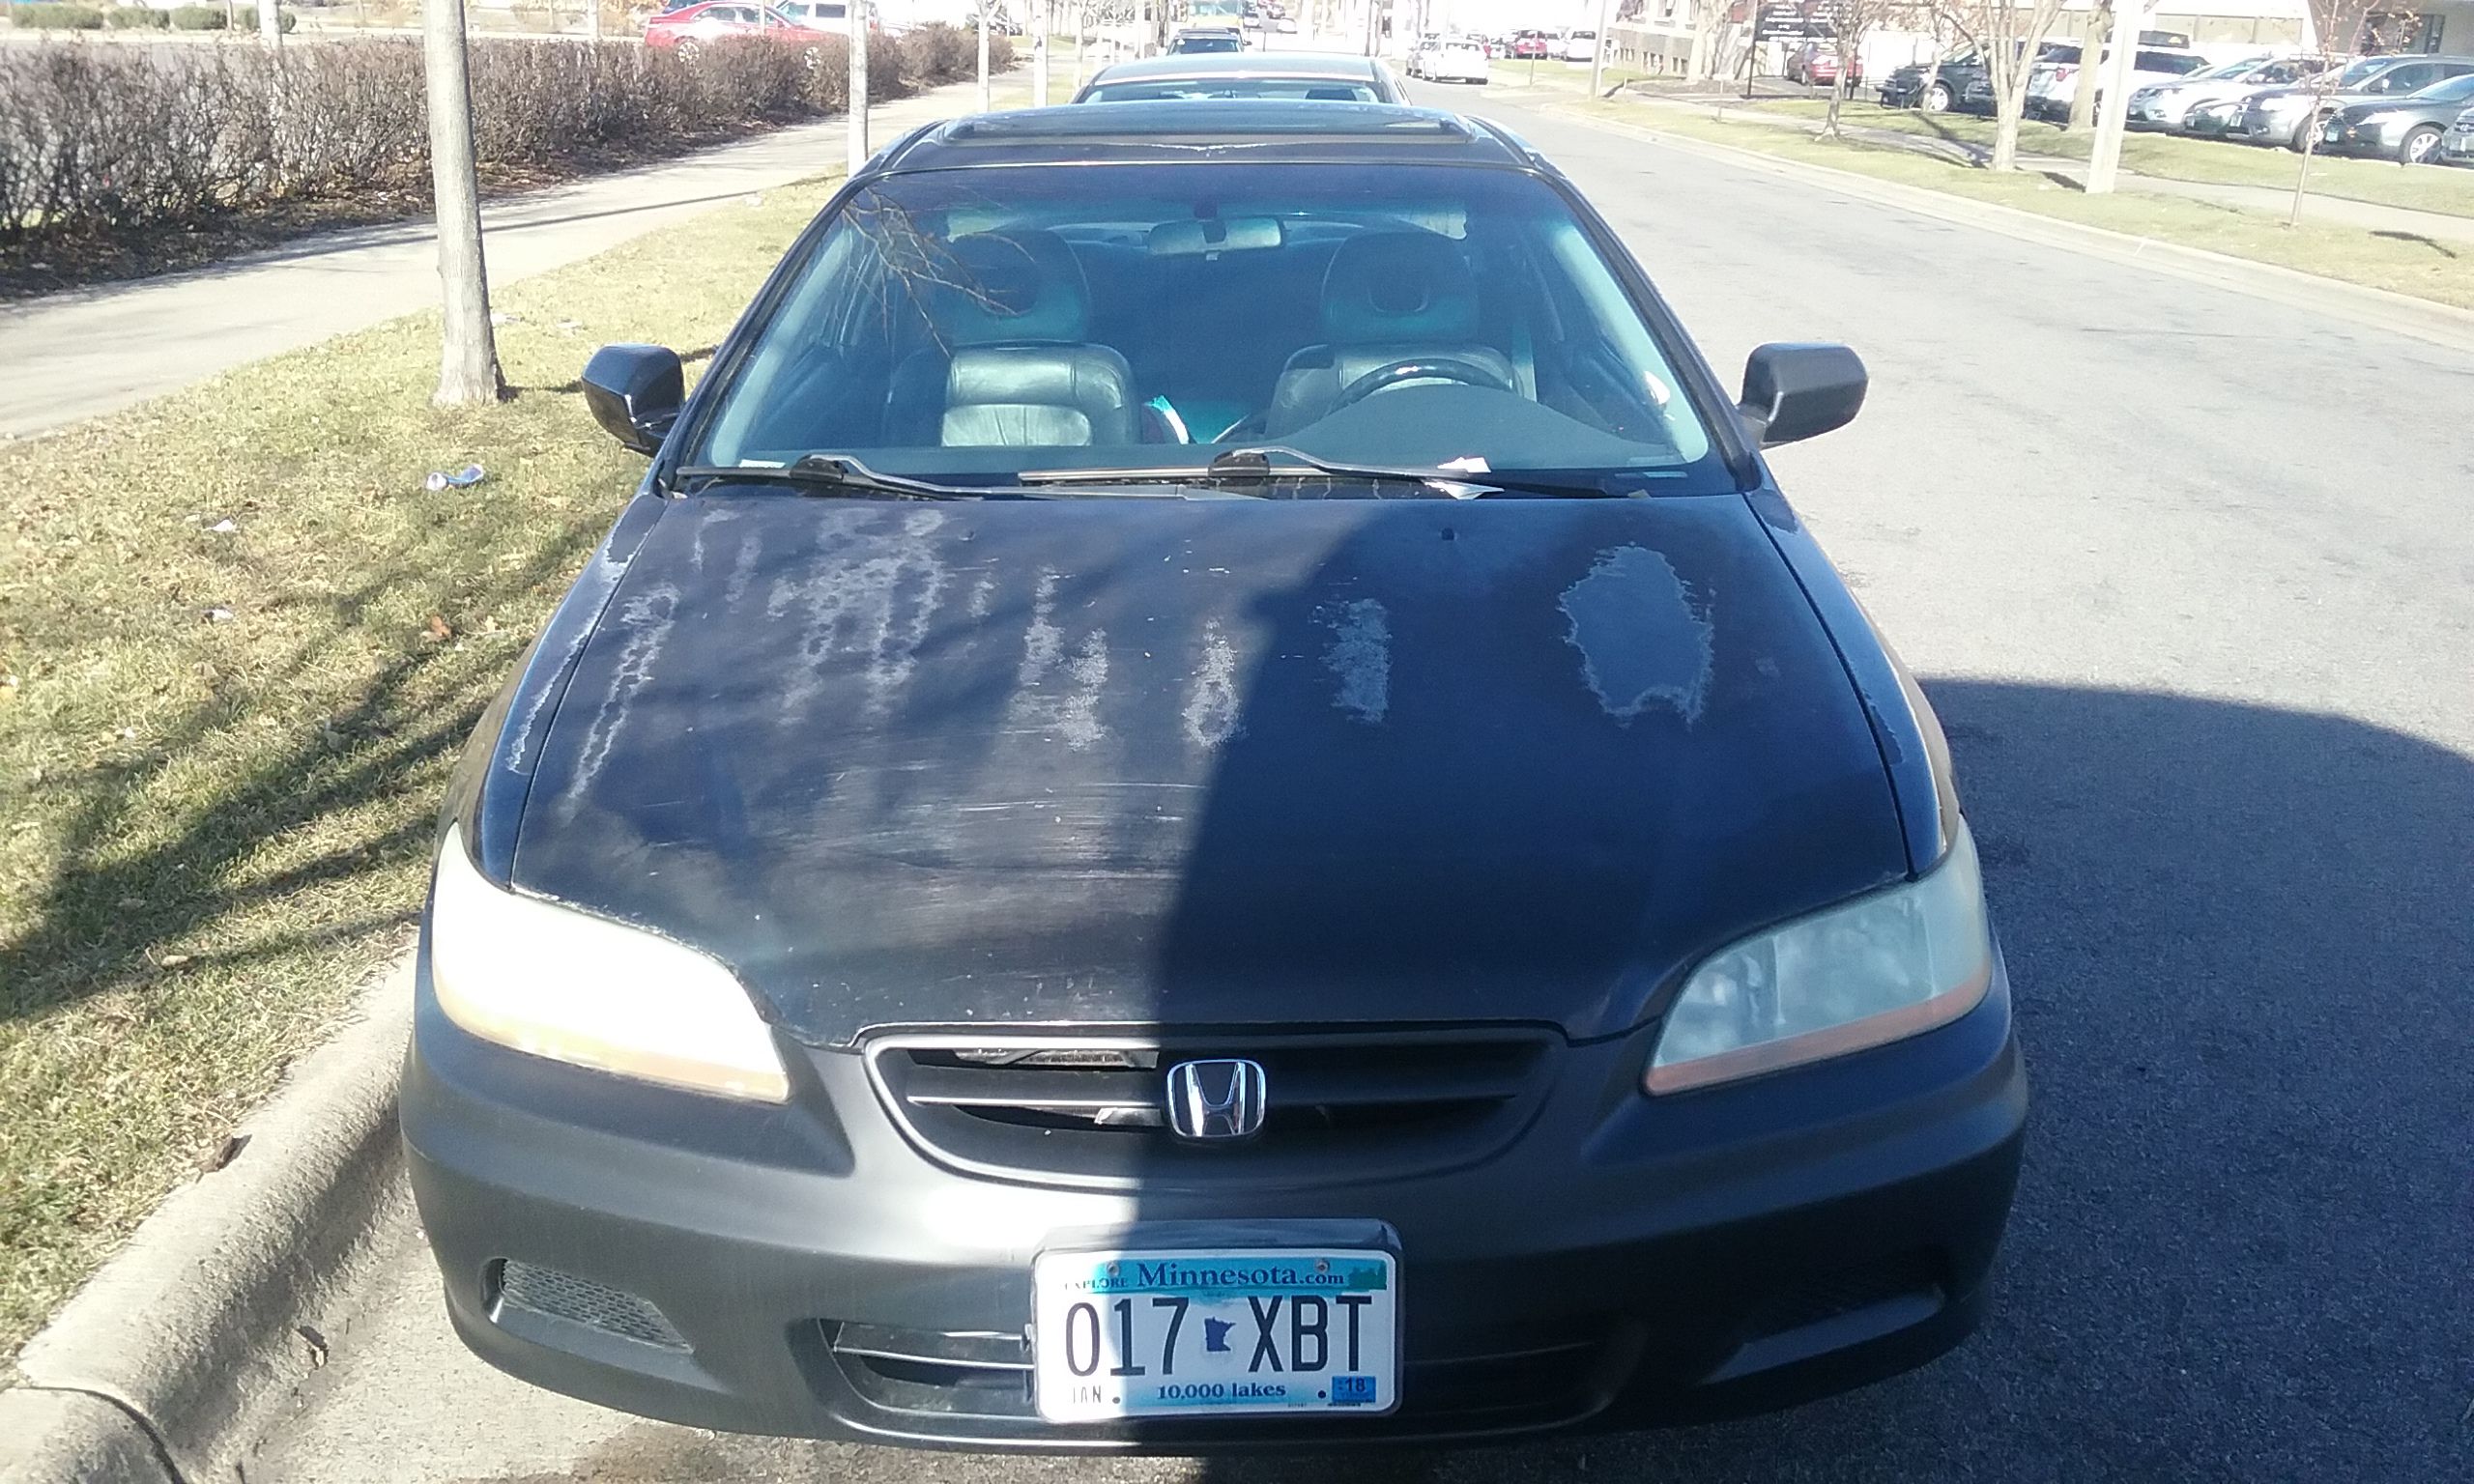 2002 Honda Accord 4cyl, Black leather seats, sun roof, am fm CD player, Replaced both rear bearings. engine runs good, heat and ac work,165.000 $3500